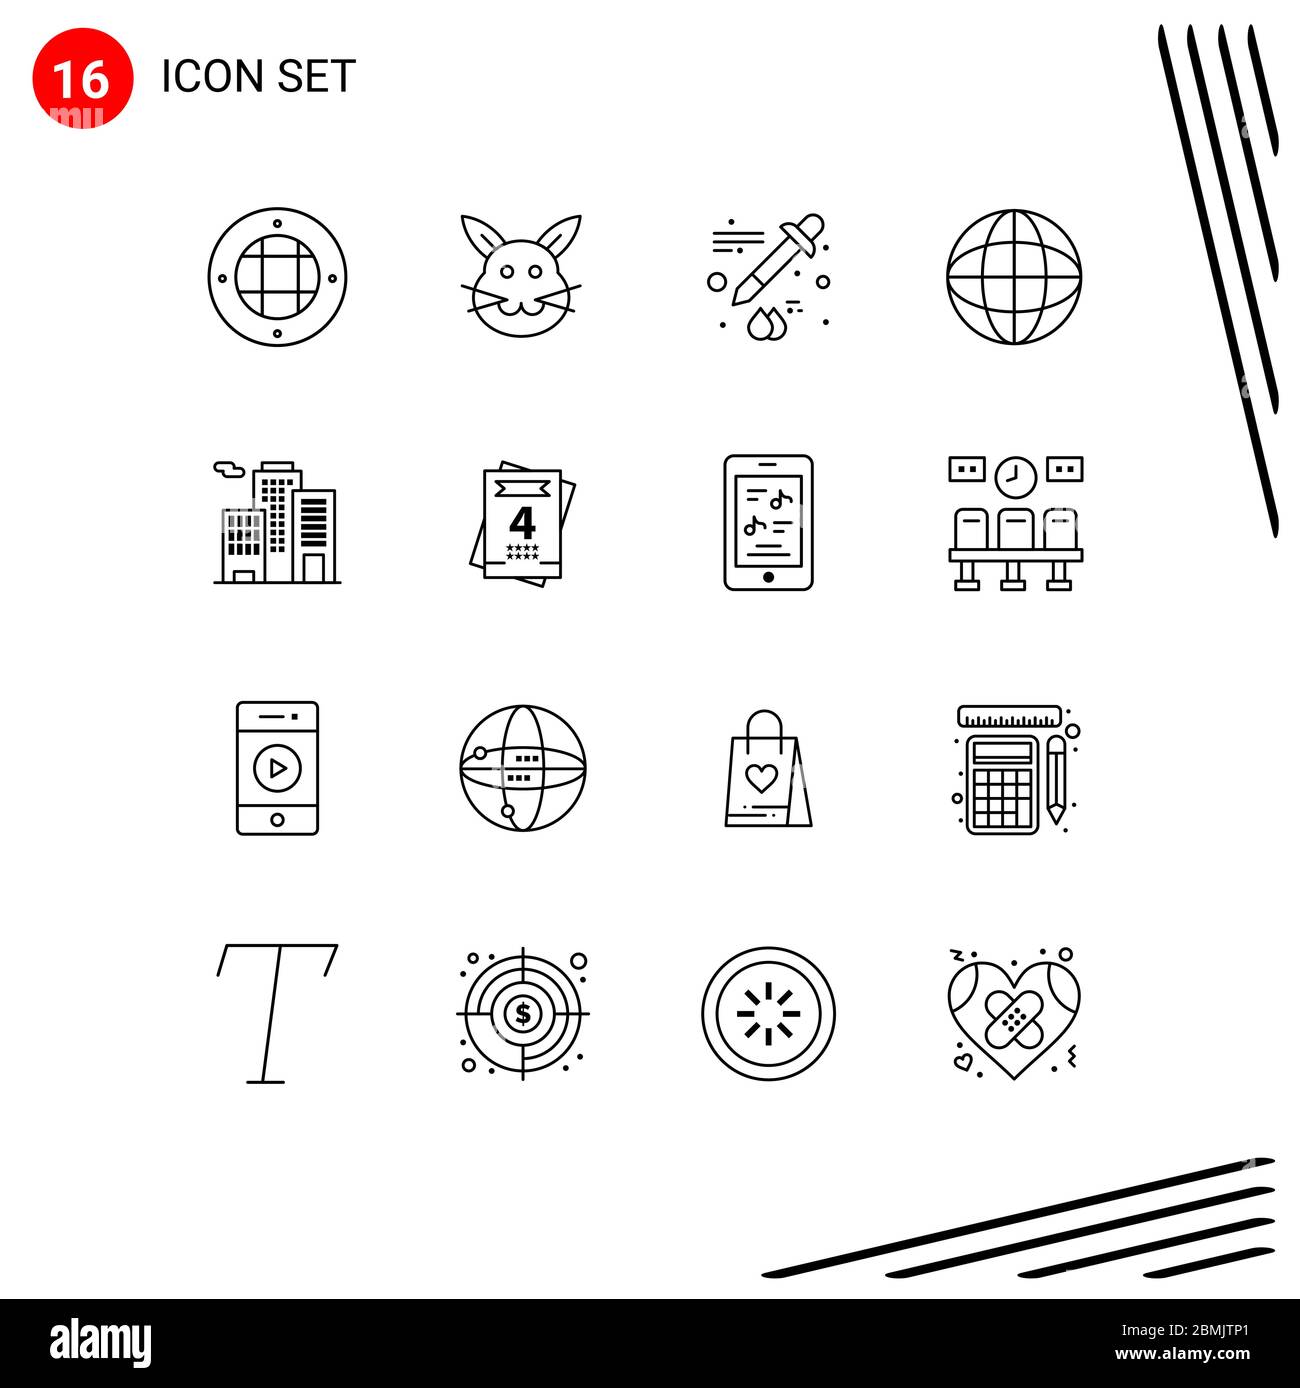 Set of 16 Modern UI Icons Symbols Signs for invitation, business, color, building, geography Editable Vector Design Elements Stock Vector